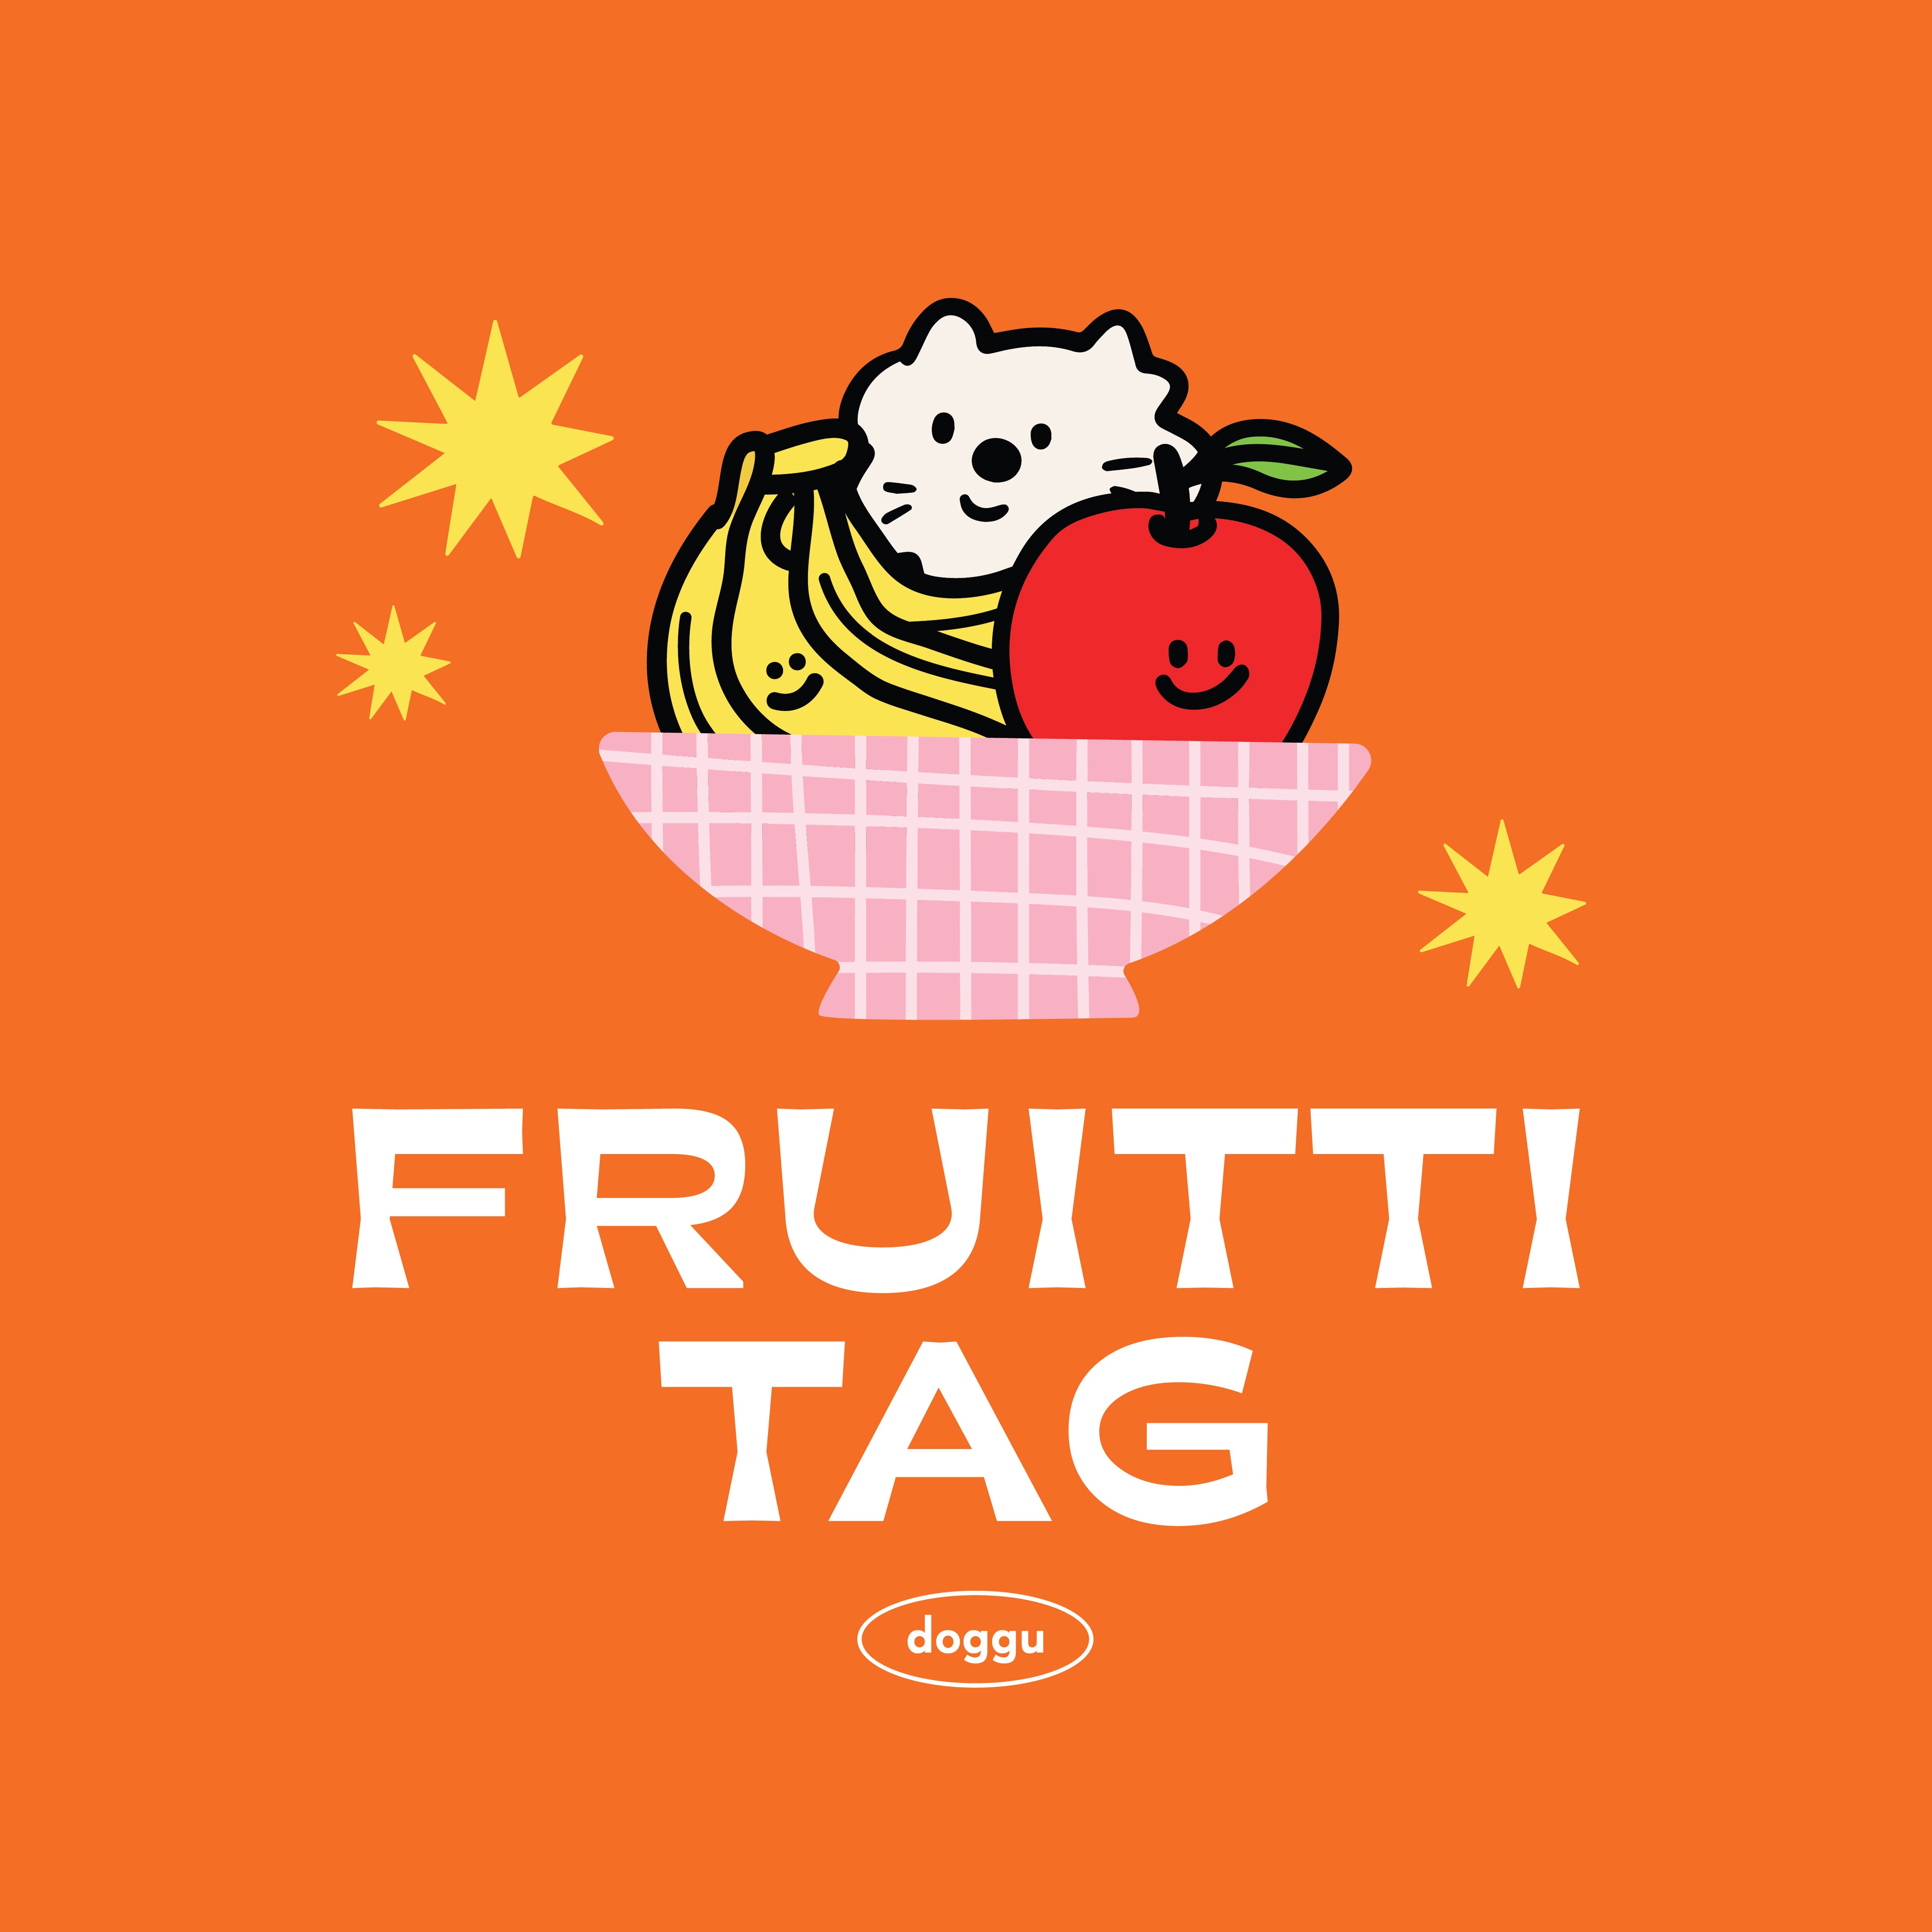 Personalise Fruitti Tag